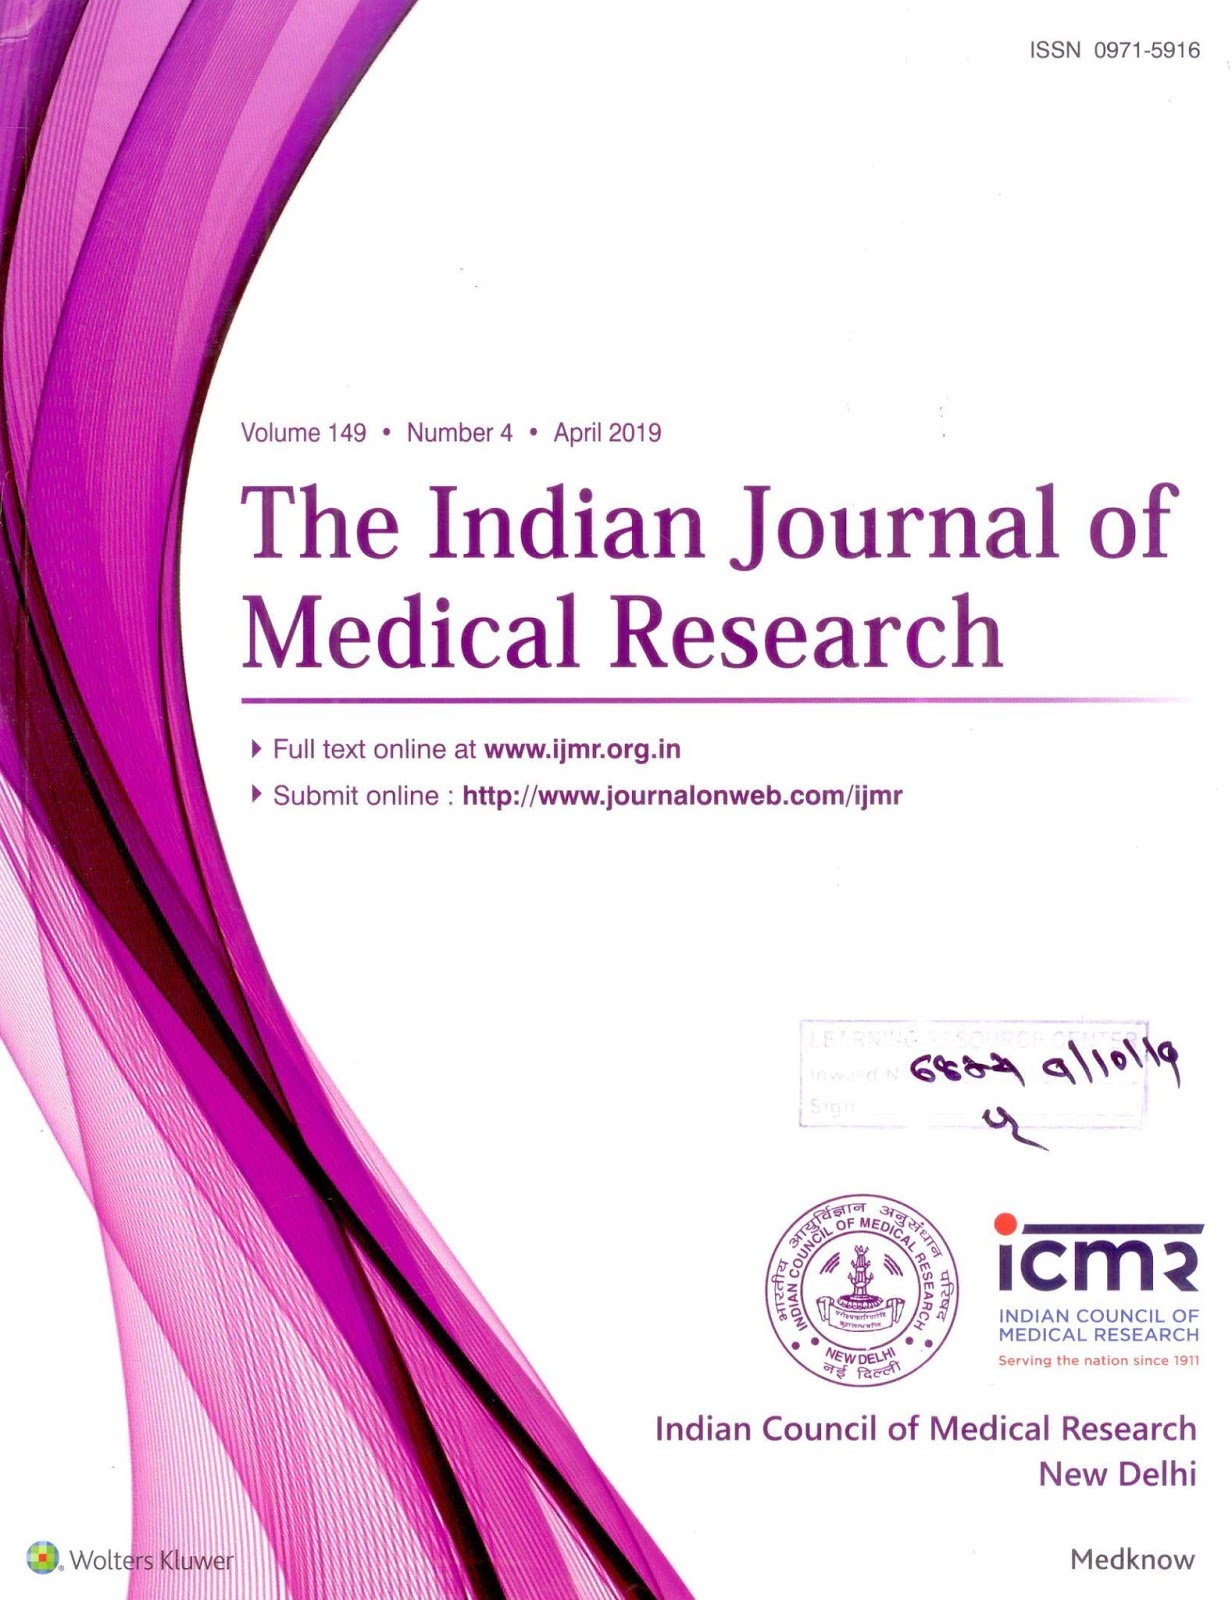 http://www.ijmr.org.in/showBackIssue.asp?issn=0971-5916;year=2019;volume=149;issue=4;month=April